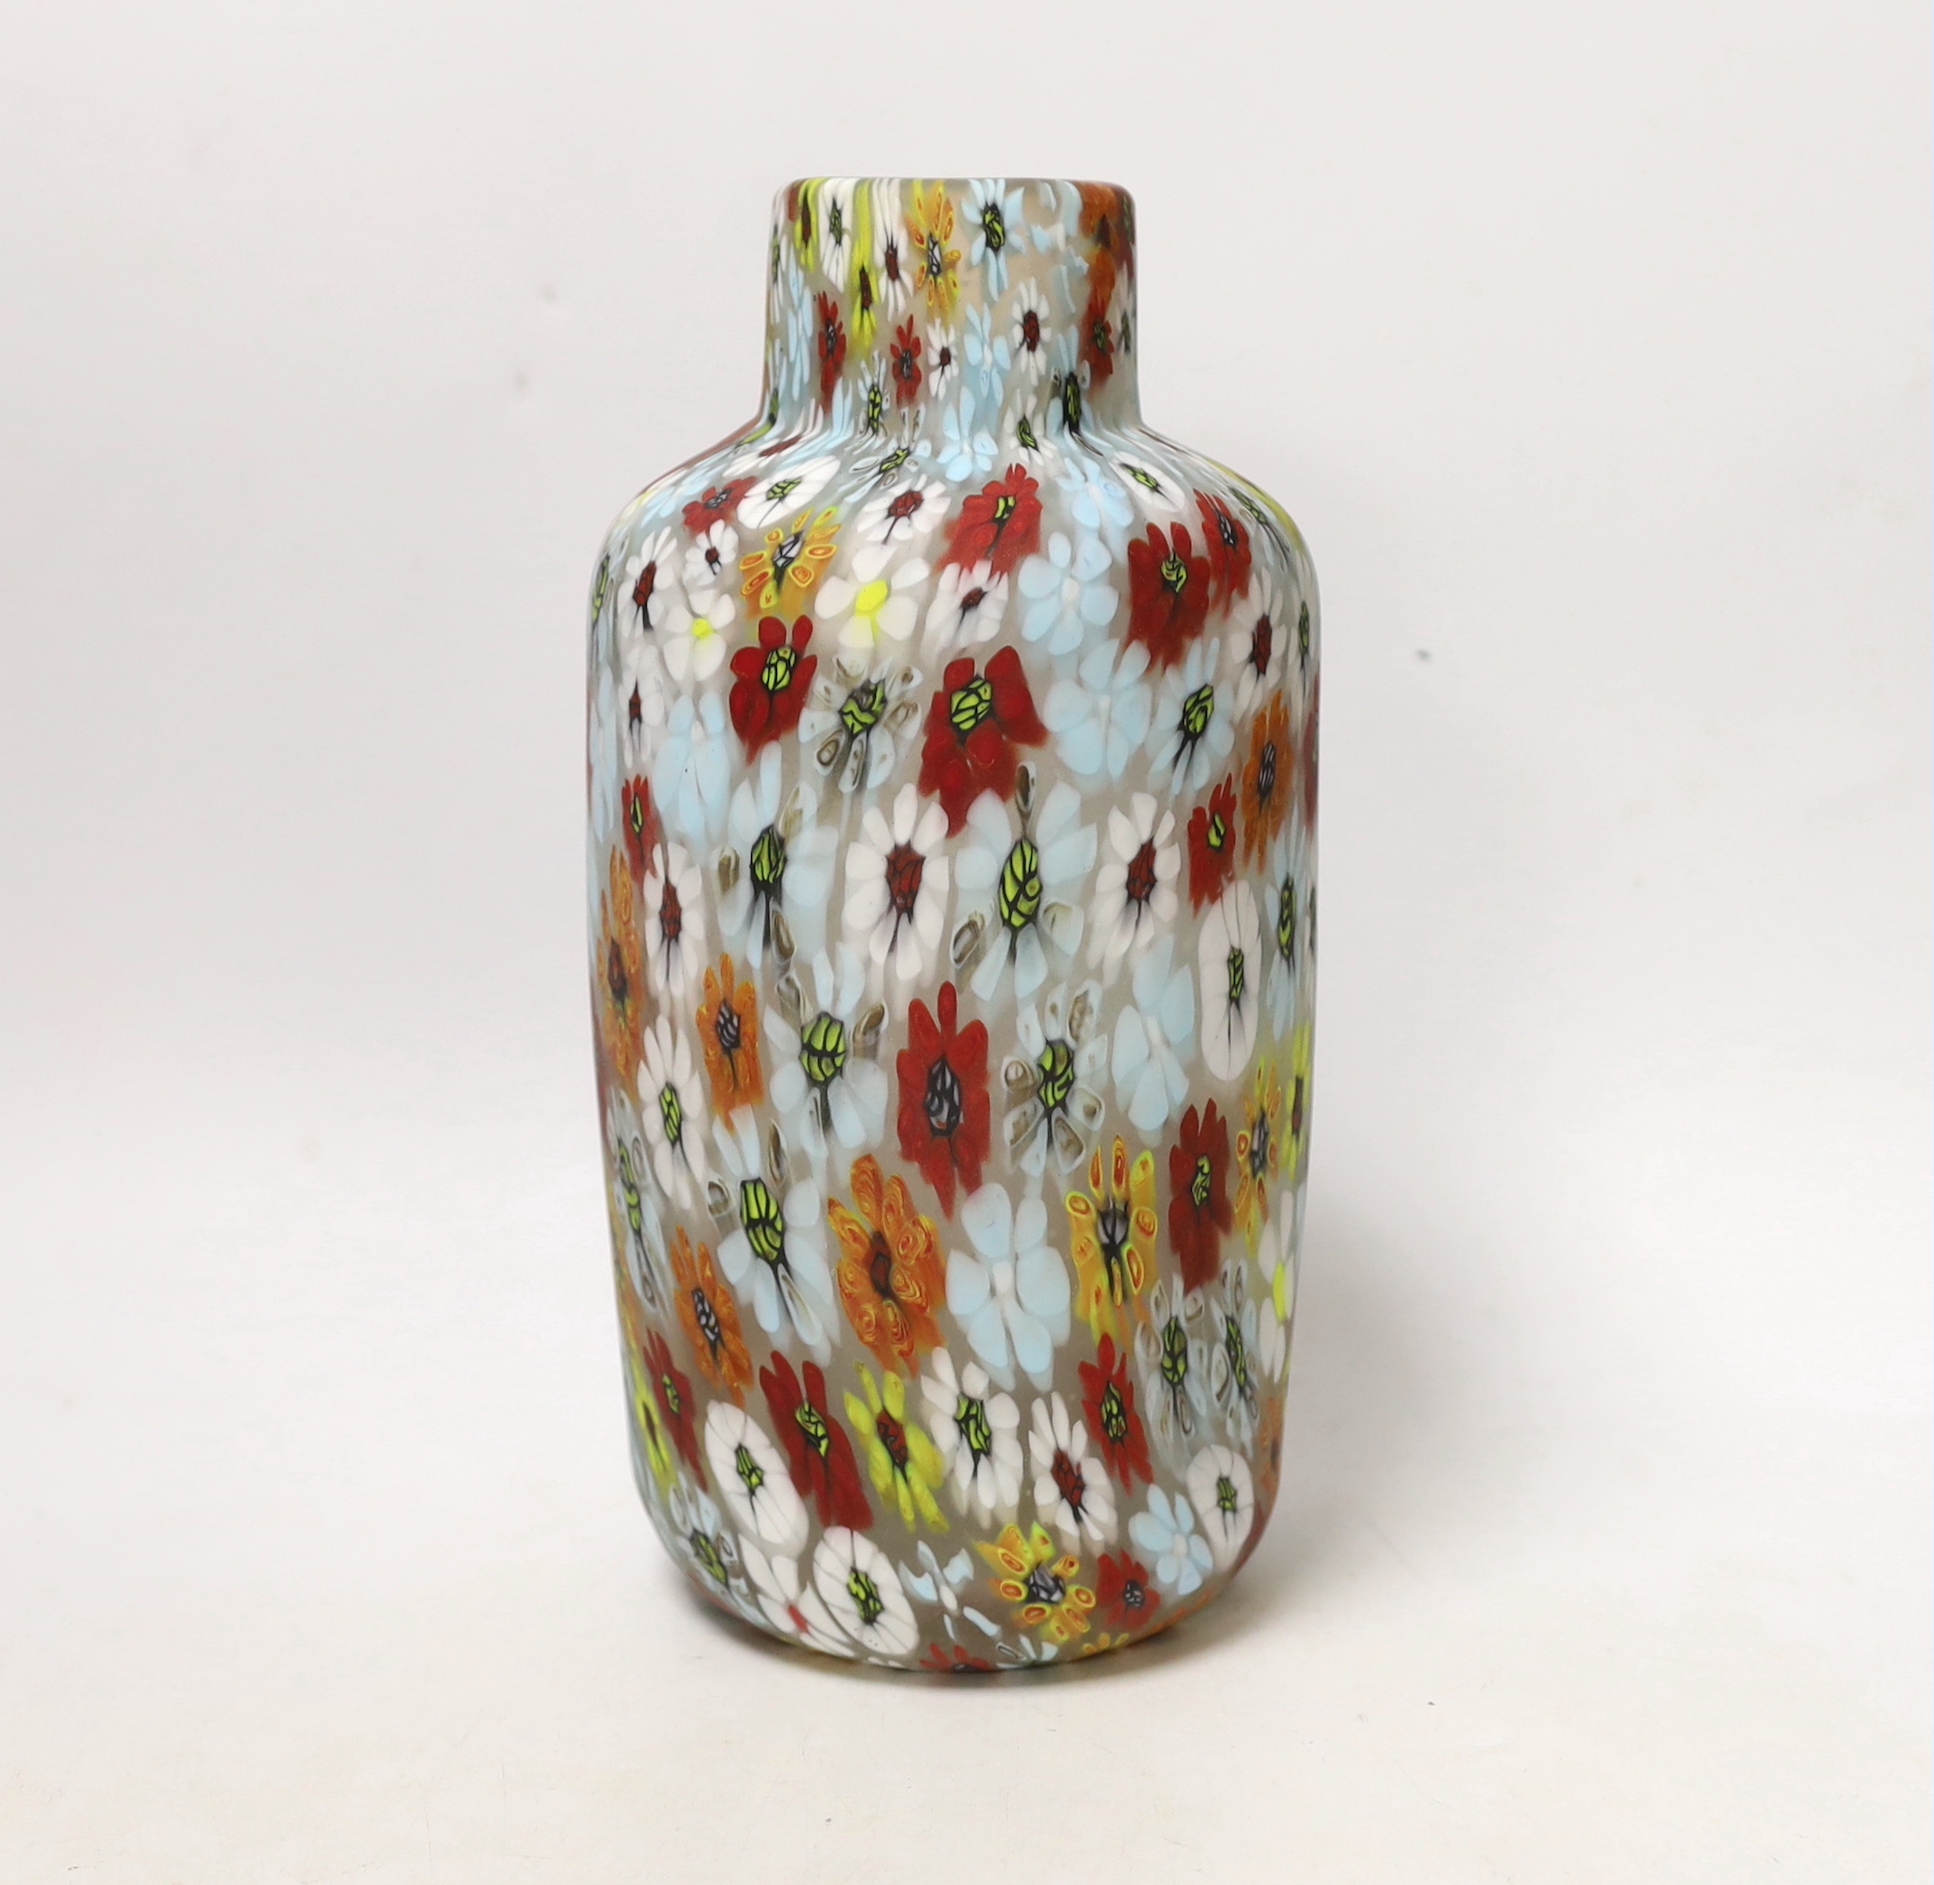 Vittorio Ferro (1932-2012) A Murano glass Murrine vase, with polychrome flower head decoration, unsigned, 25cm., Please note this lot attracts an additional import tax of 20% on the hammer price